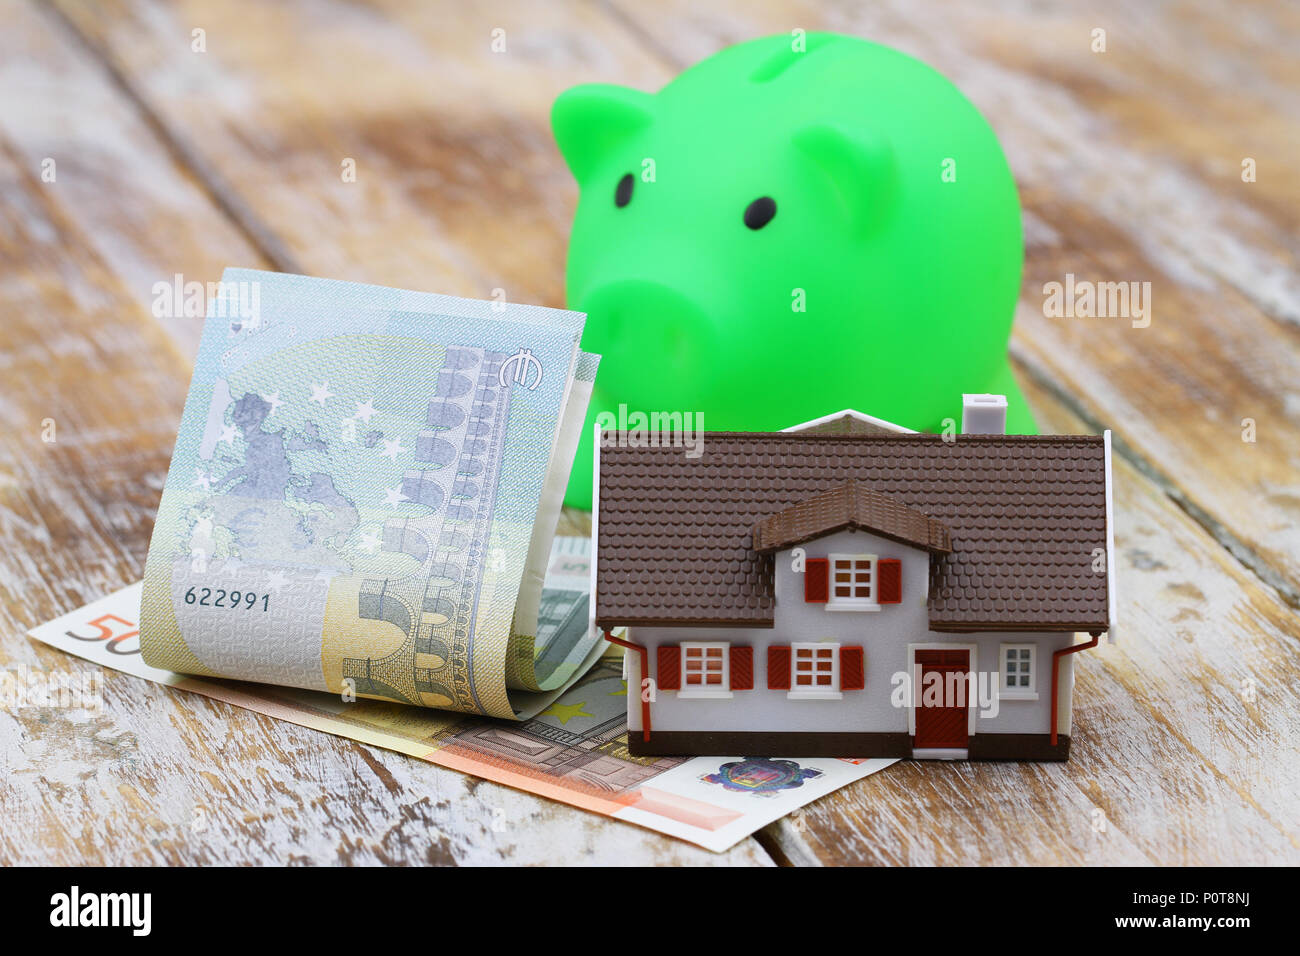 Model of a house, EUR banknotes and piggy bank on wooden surface Stock Photo